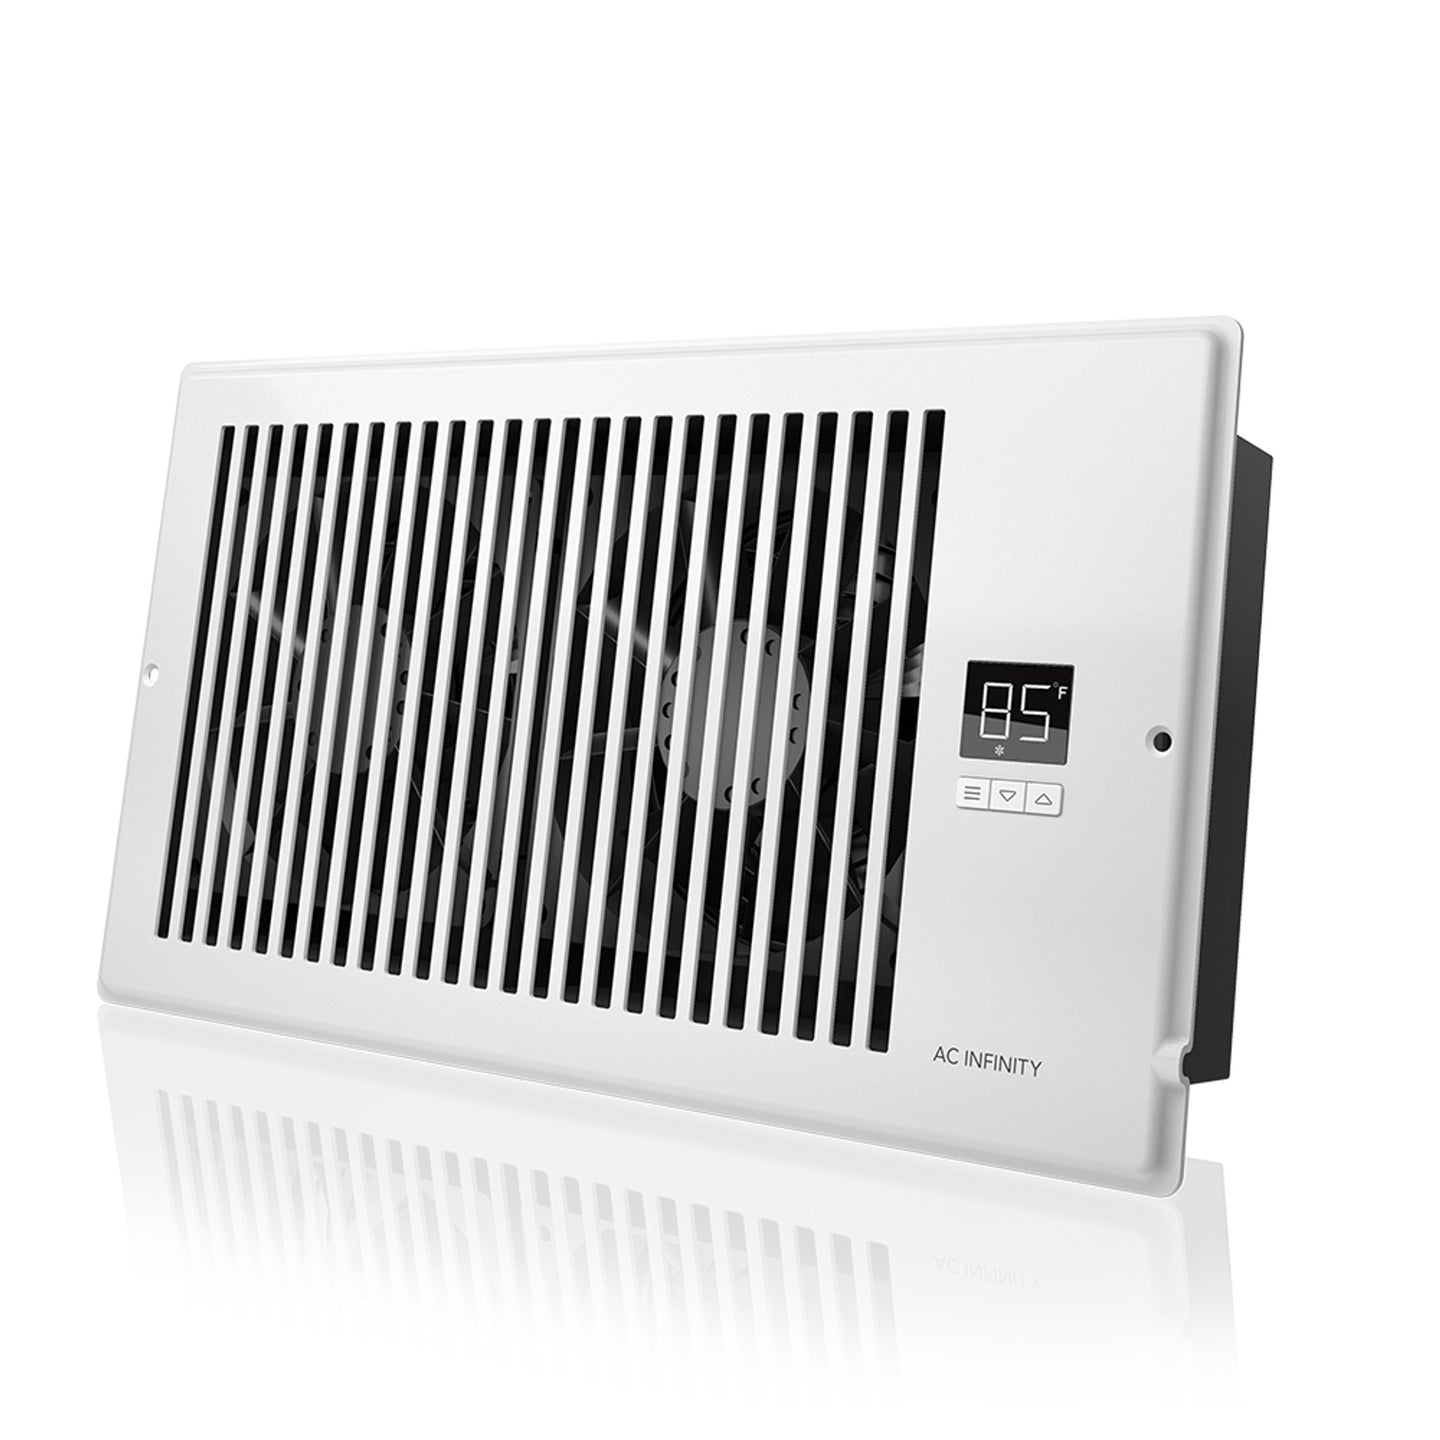 AC Infinity AIRTAP T6, Quiet Register Booster Fan System, White, for 6